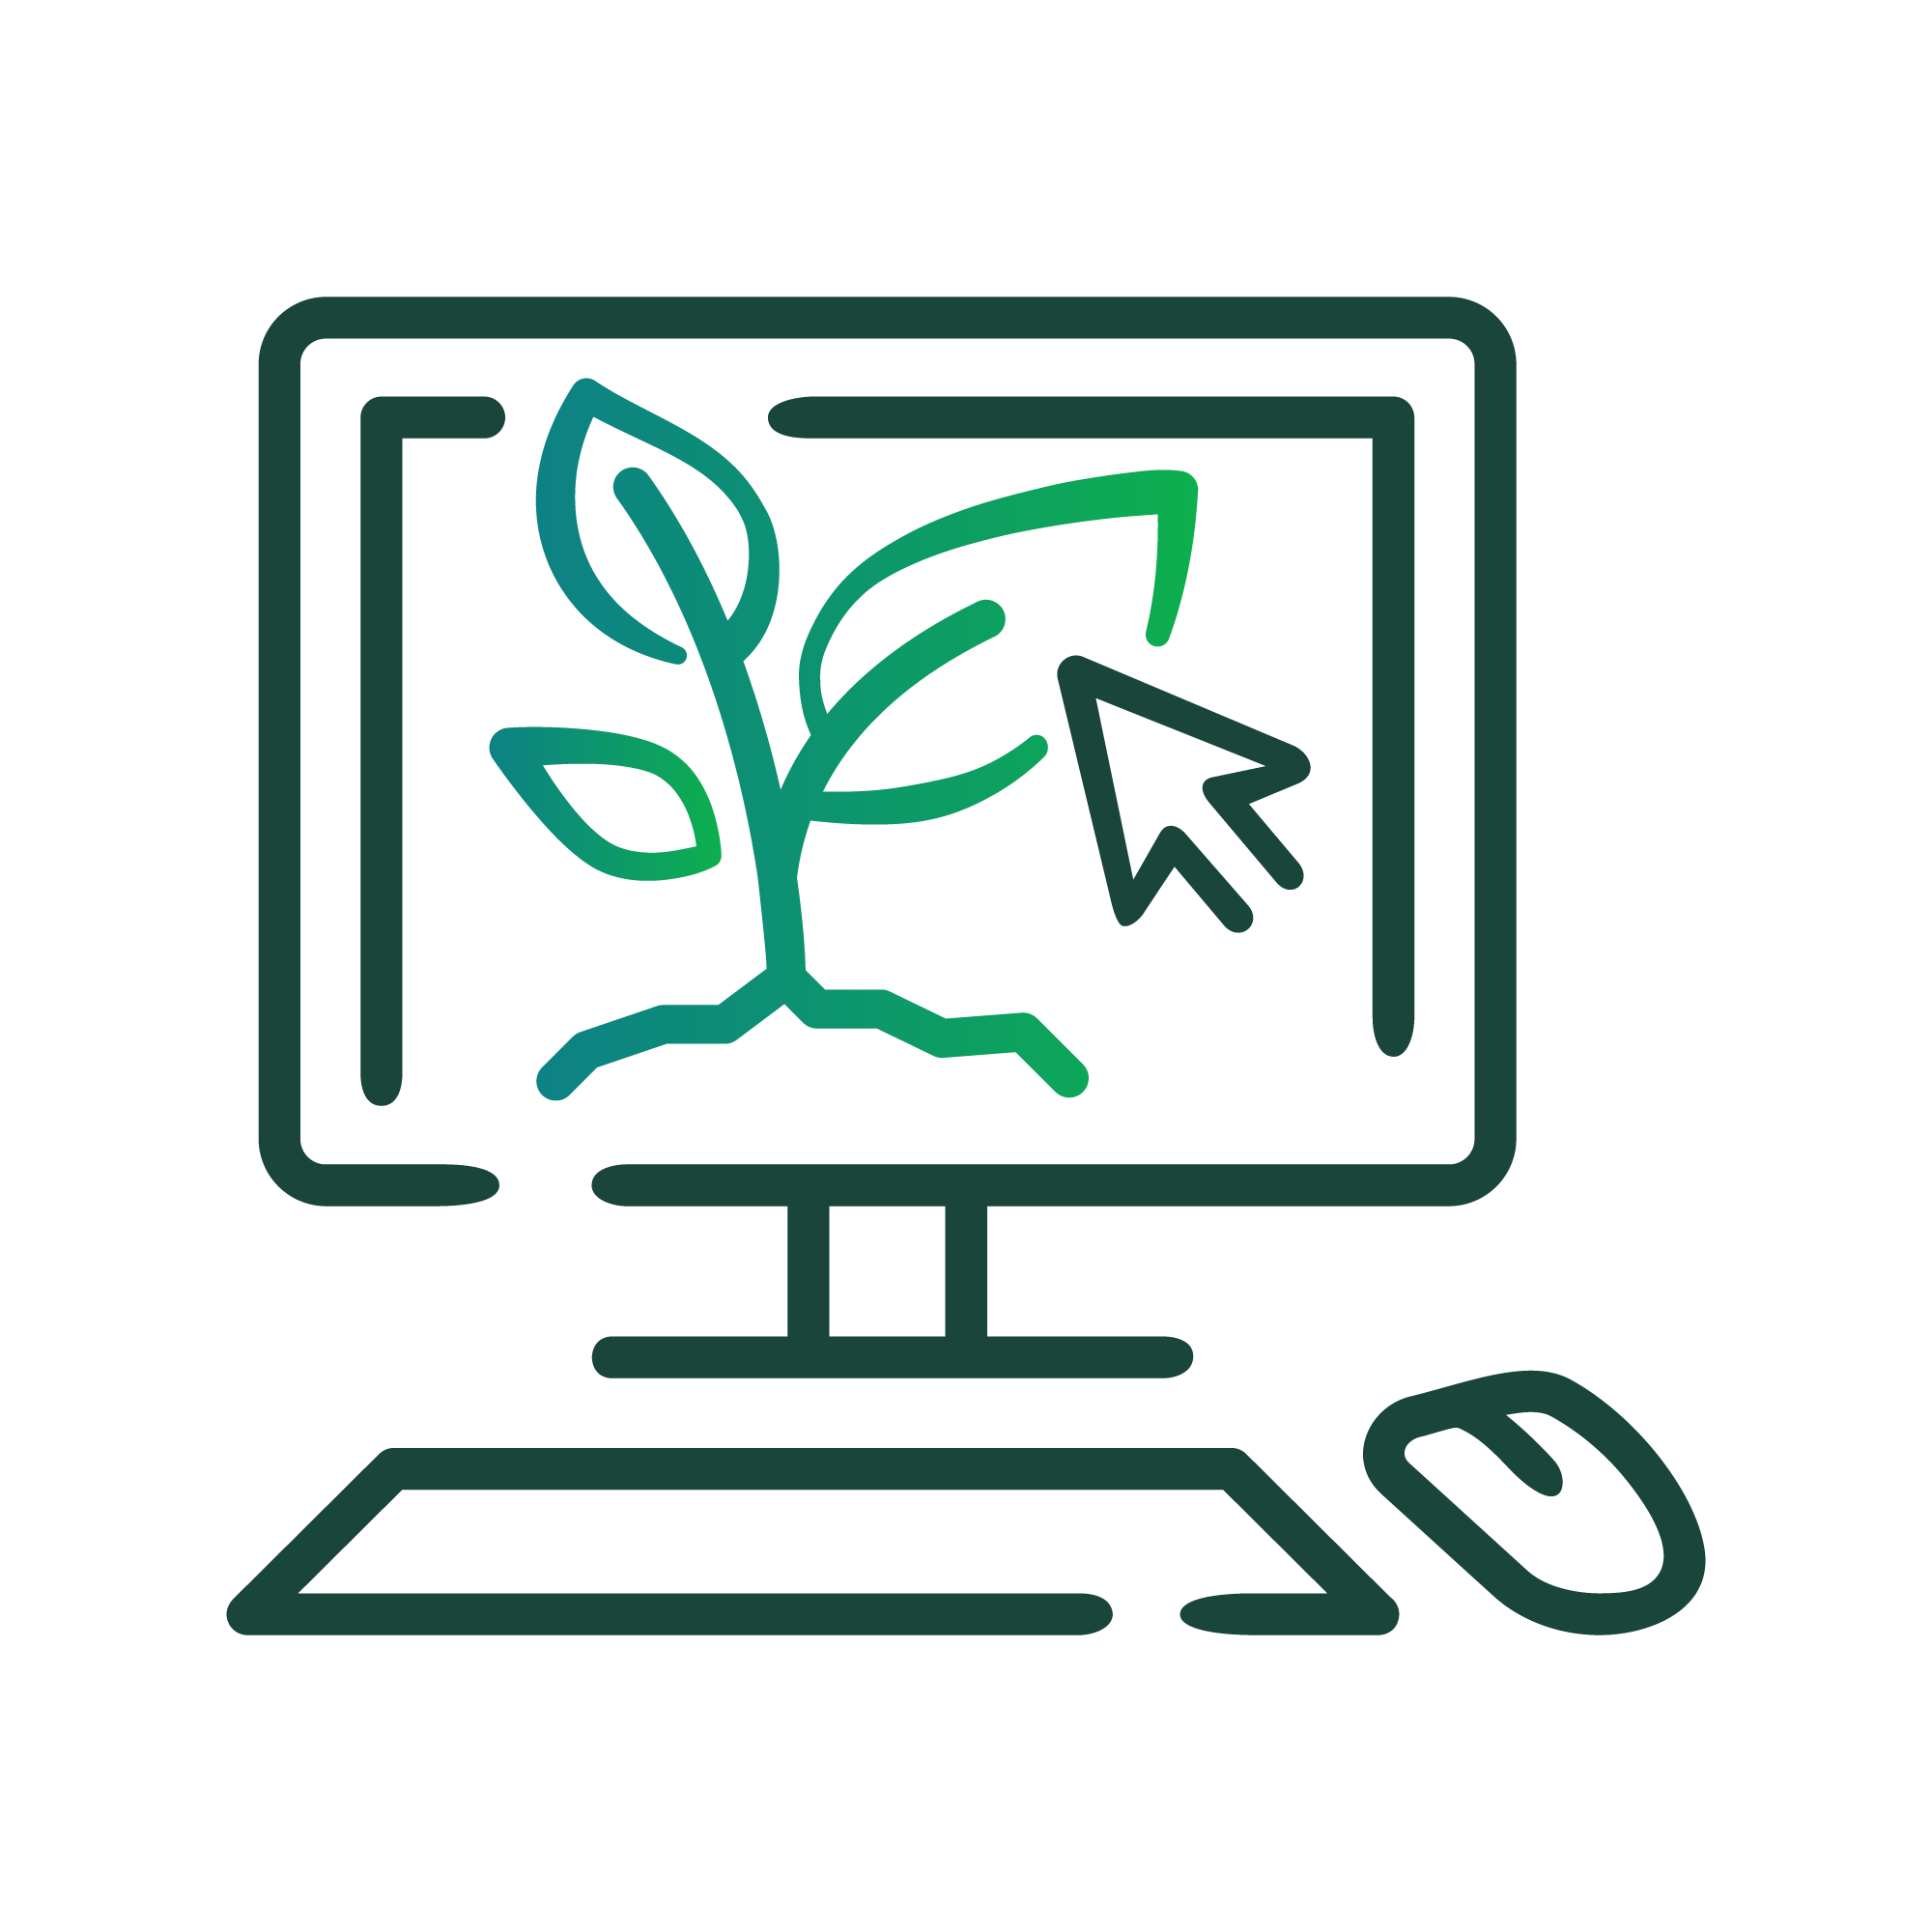 Computer with image of leaf growing 